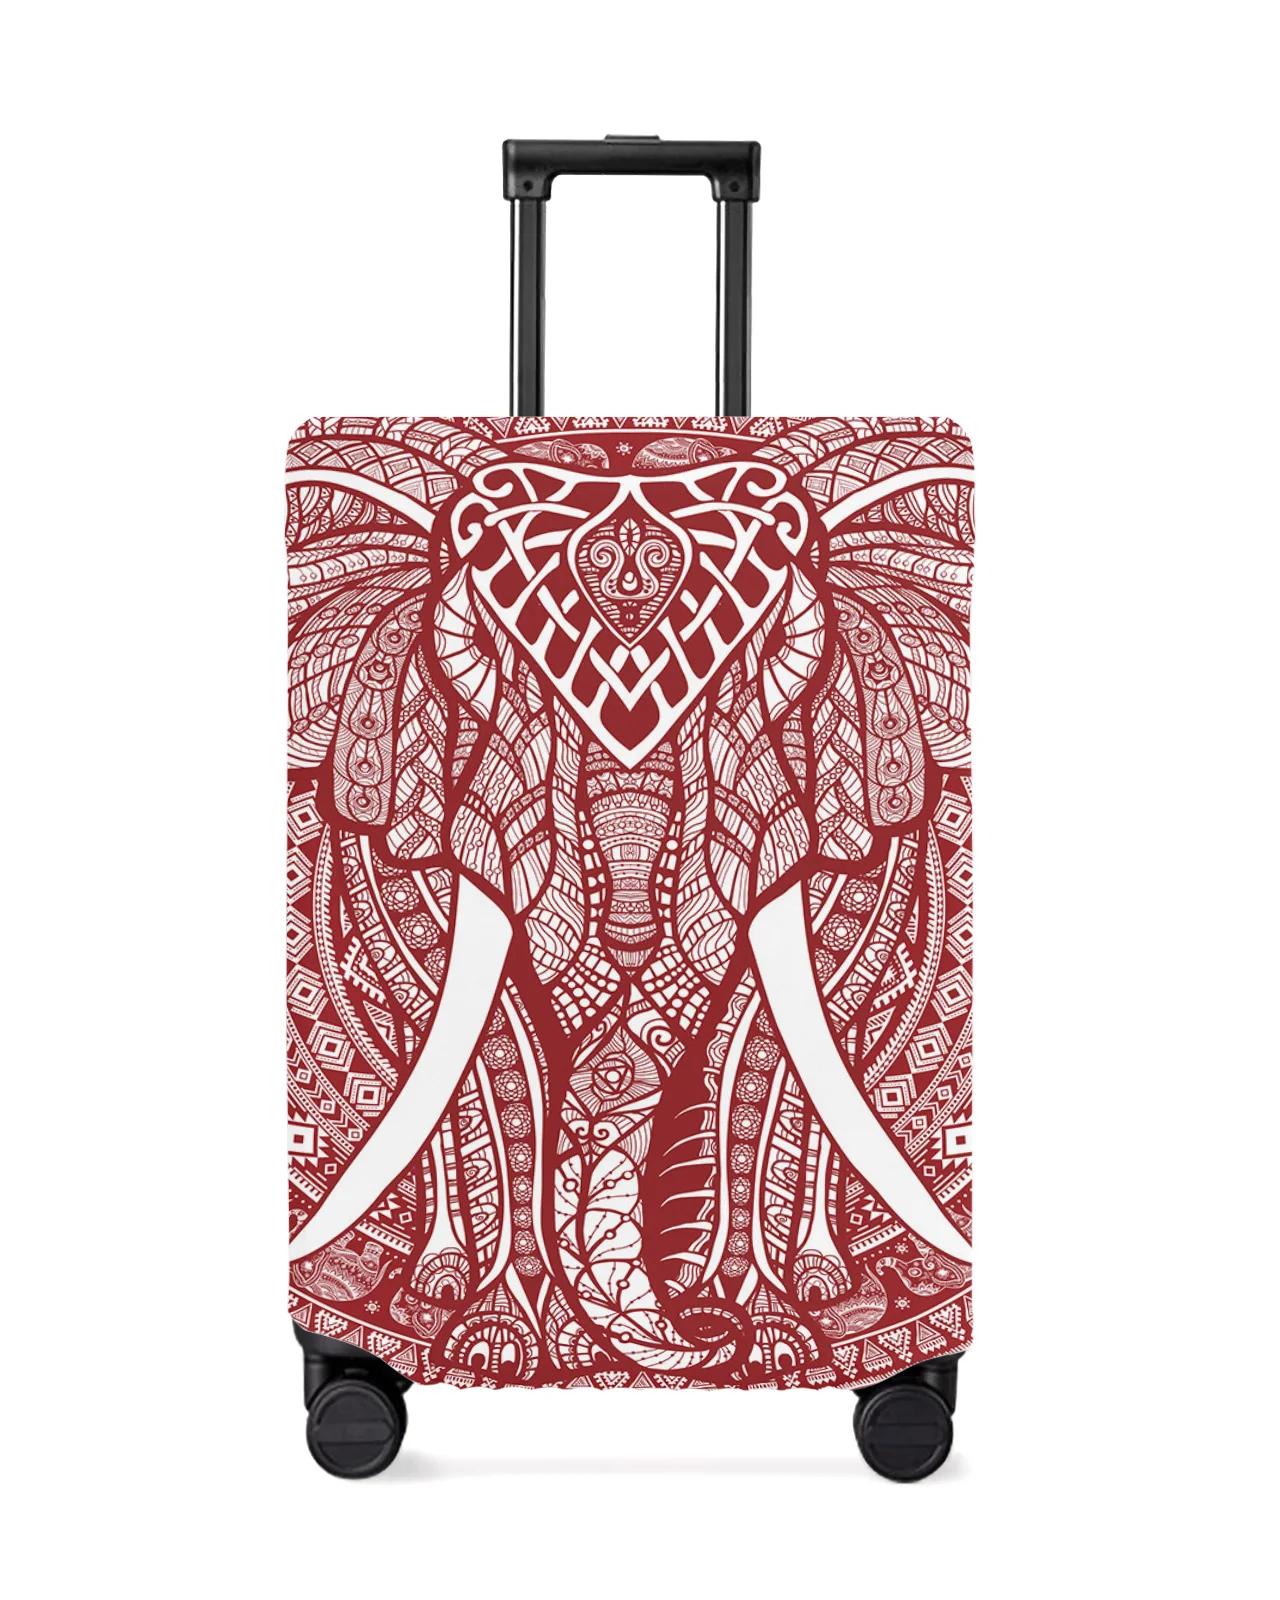 

Mandala Bohemia Elephant Red Travel Luggage Cover Elastic Baggage Cover Suitcase Case Dust Cover Travel Accessories